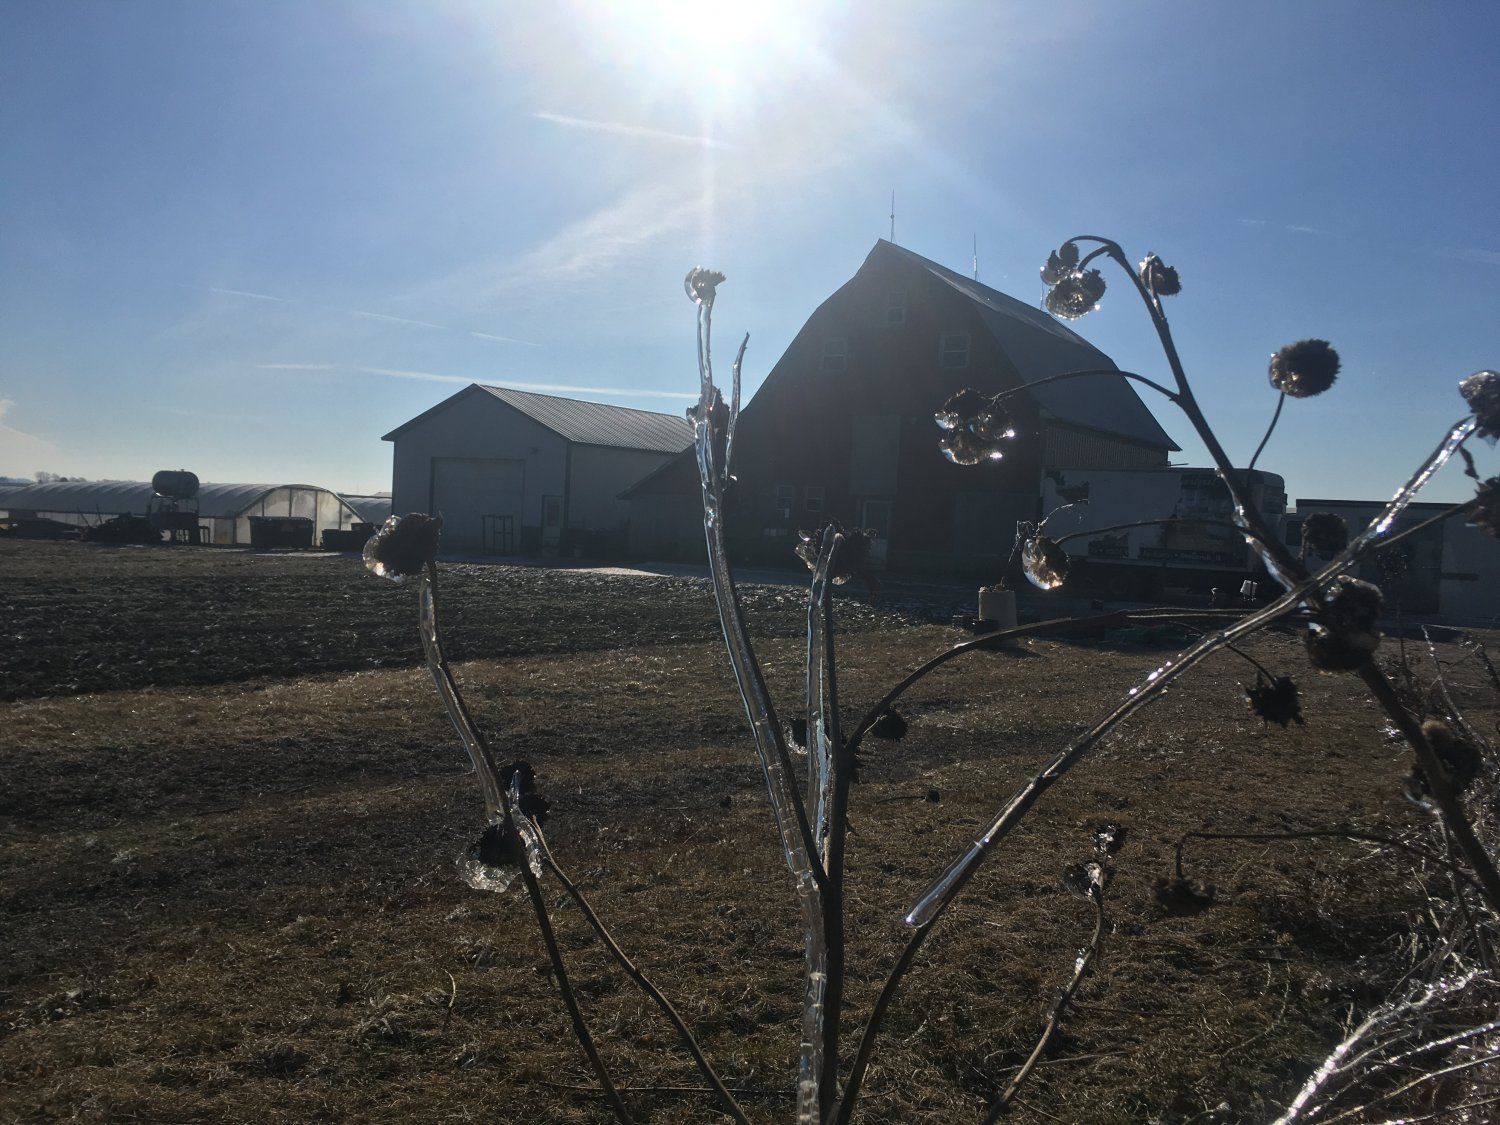 Farm Happenings for February 6, 2021: Small Pop-up Delivery